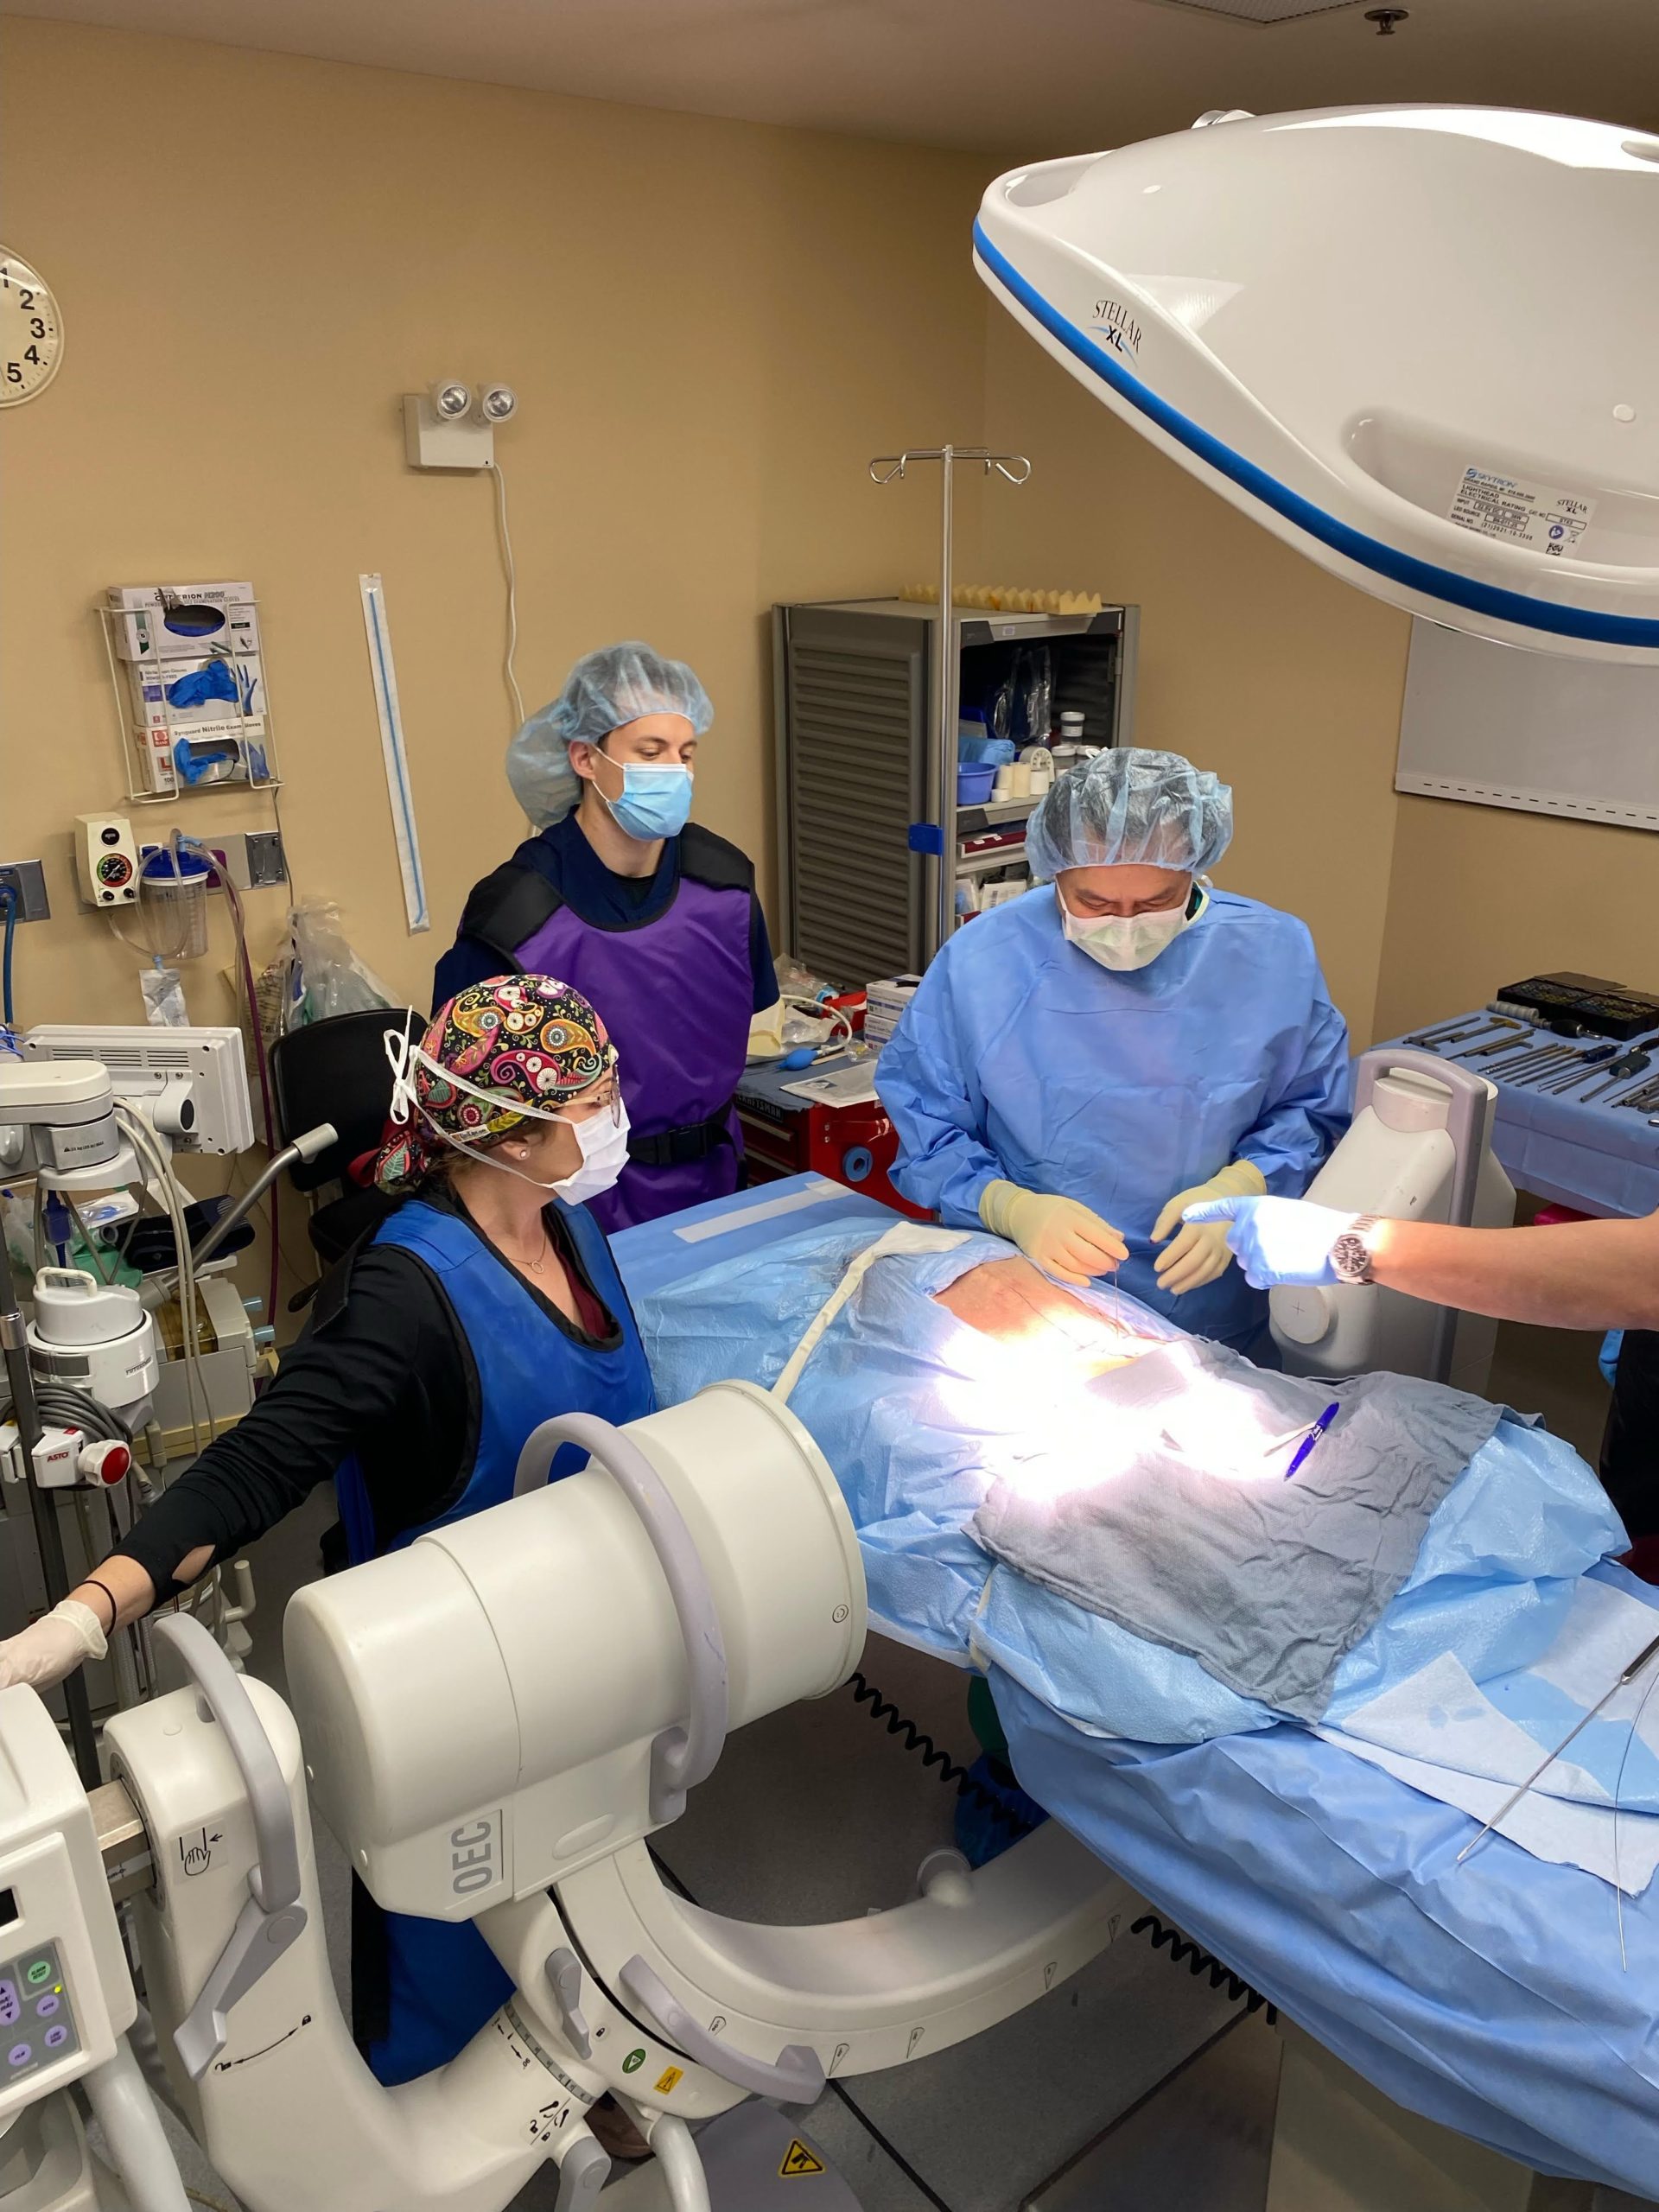 Pensacola spine surgeon hosts cadaver lab to help colleagues, adds ‘cutting-edge’ tech to minimally invasive procedures